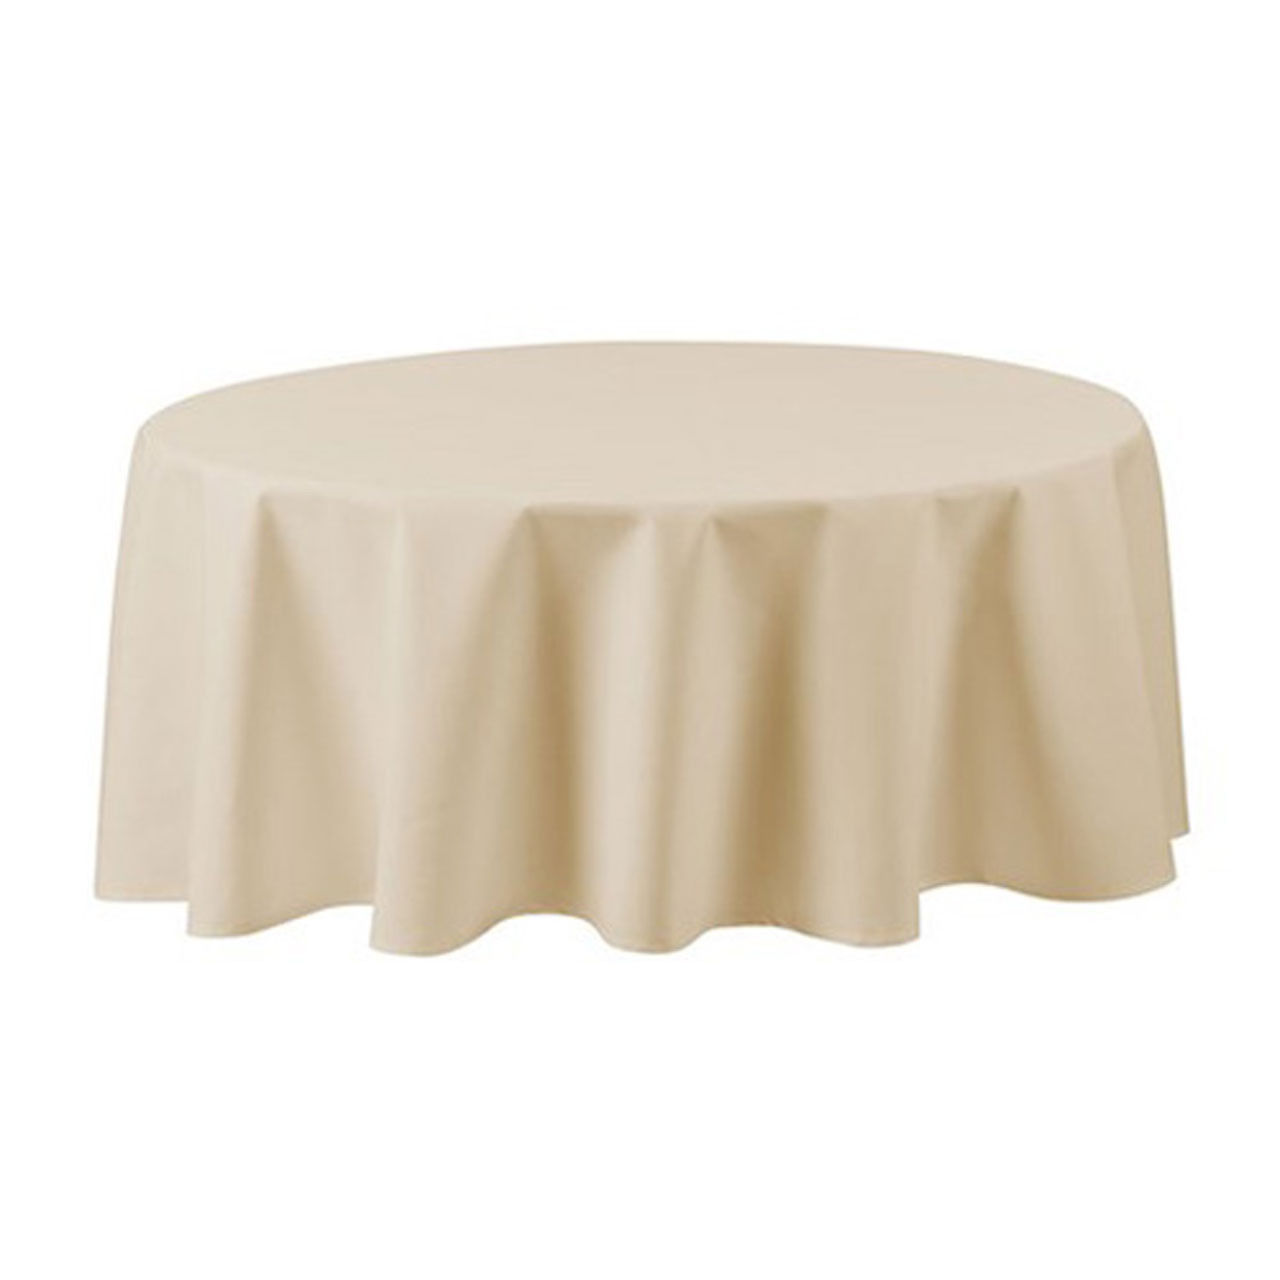 Where do the ivory 120 inch round tablecloths ship from?